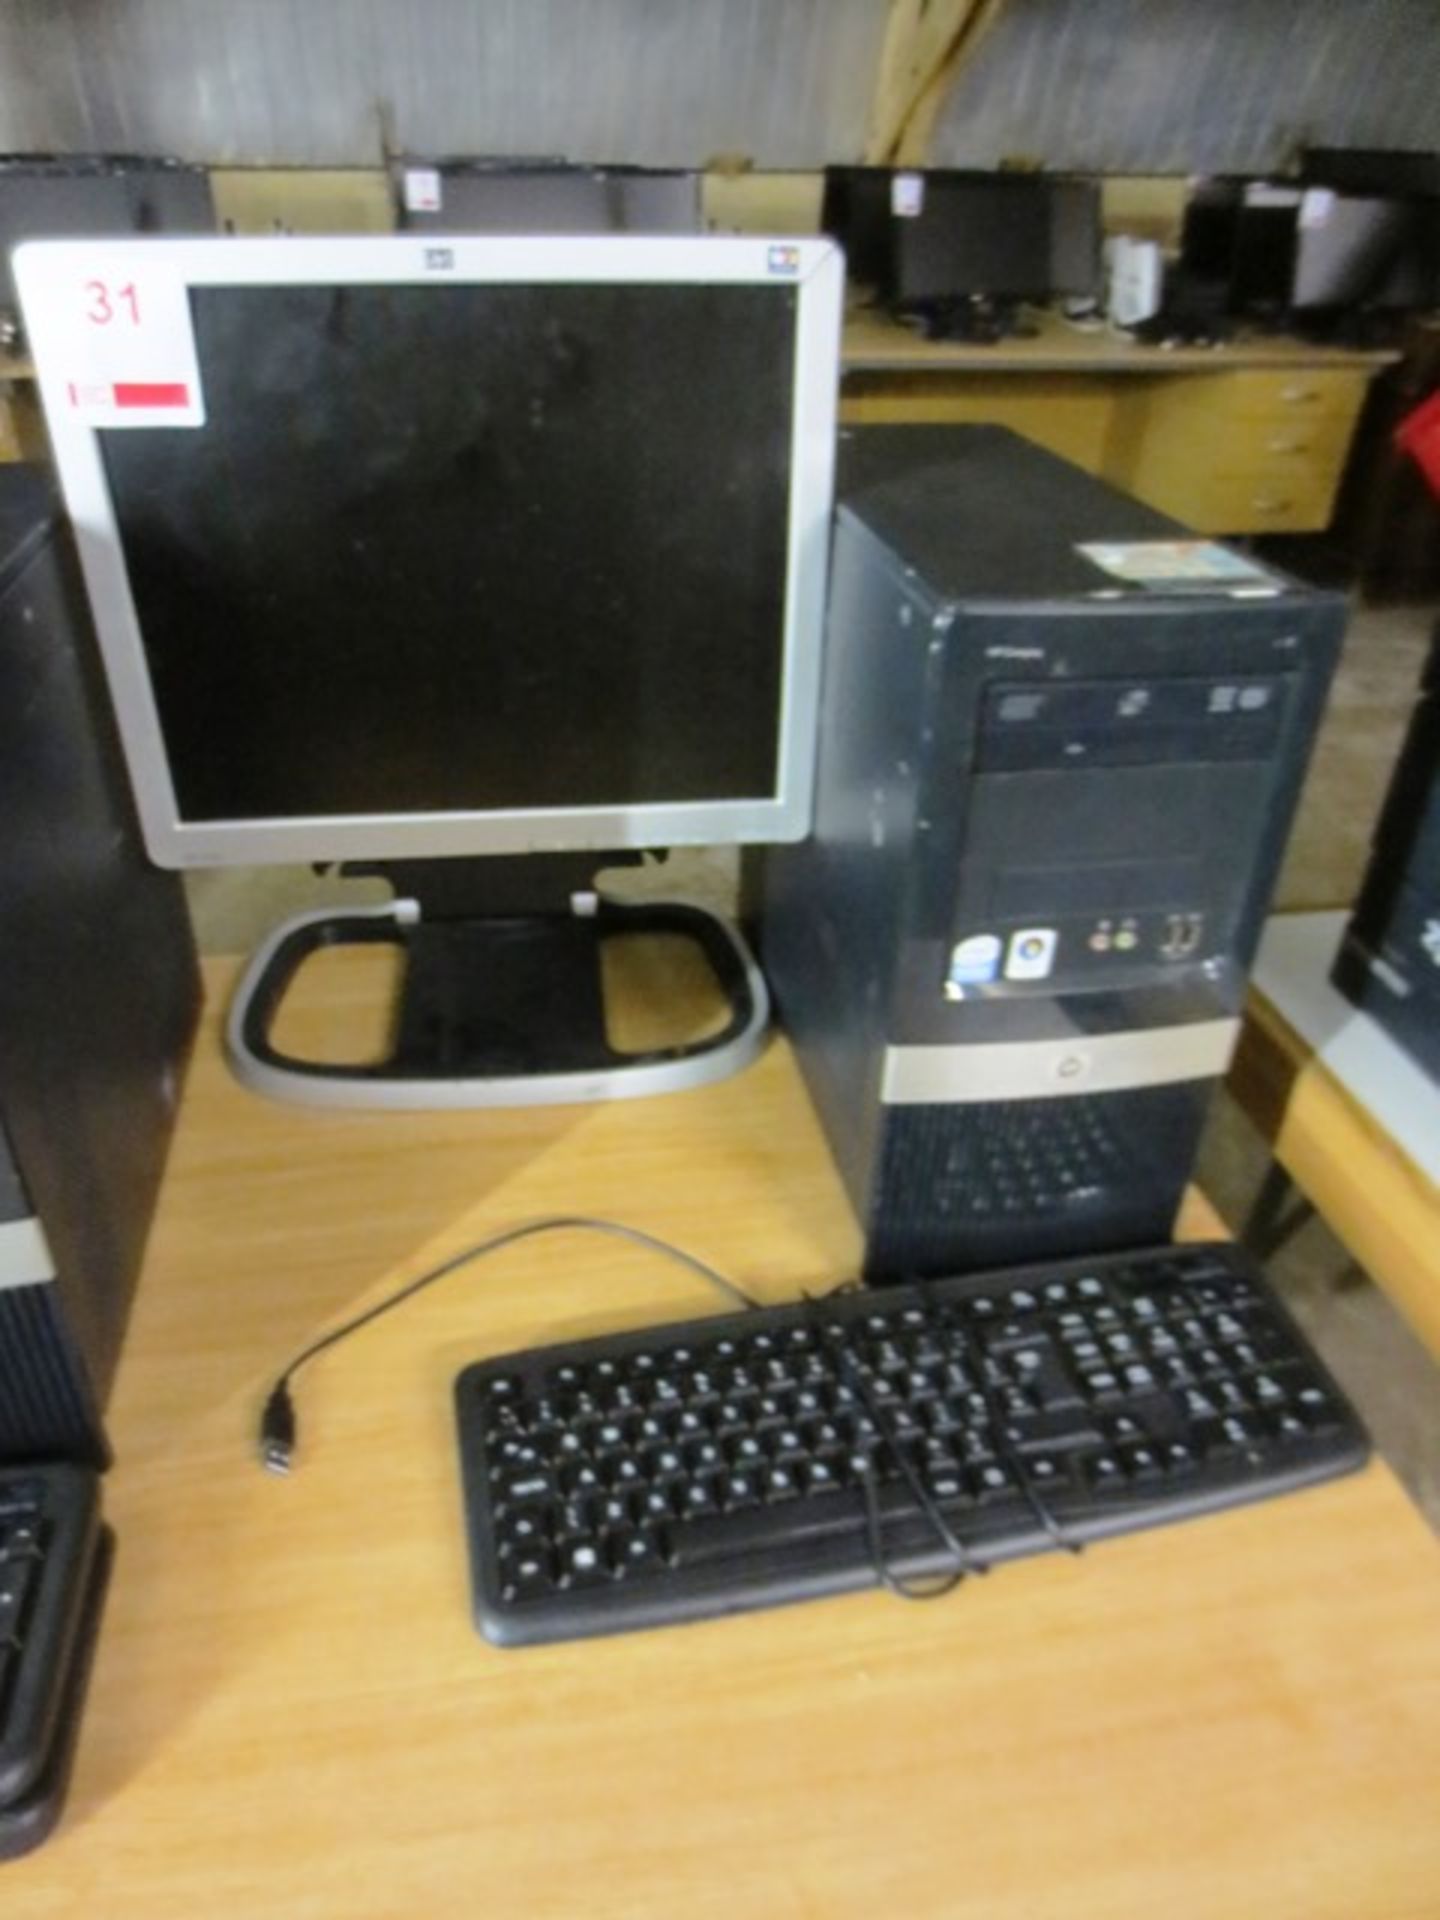 Two HP Compaq DX2400 micro towers, serial nos: 2UA84502Q2, two flat screen monitors, keyboards,